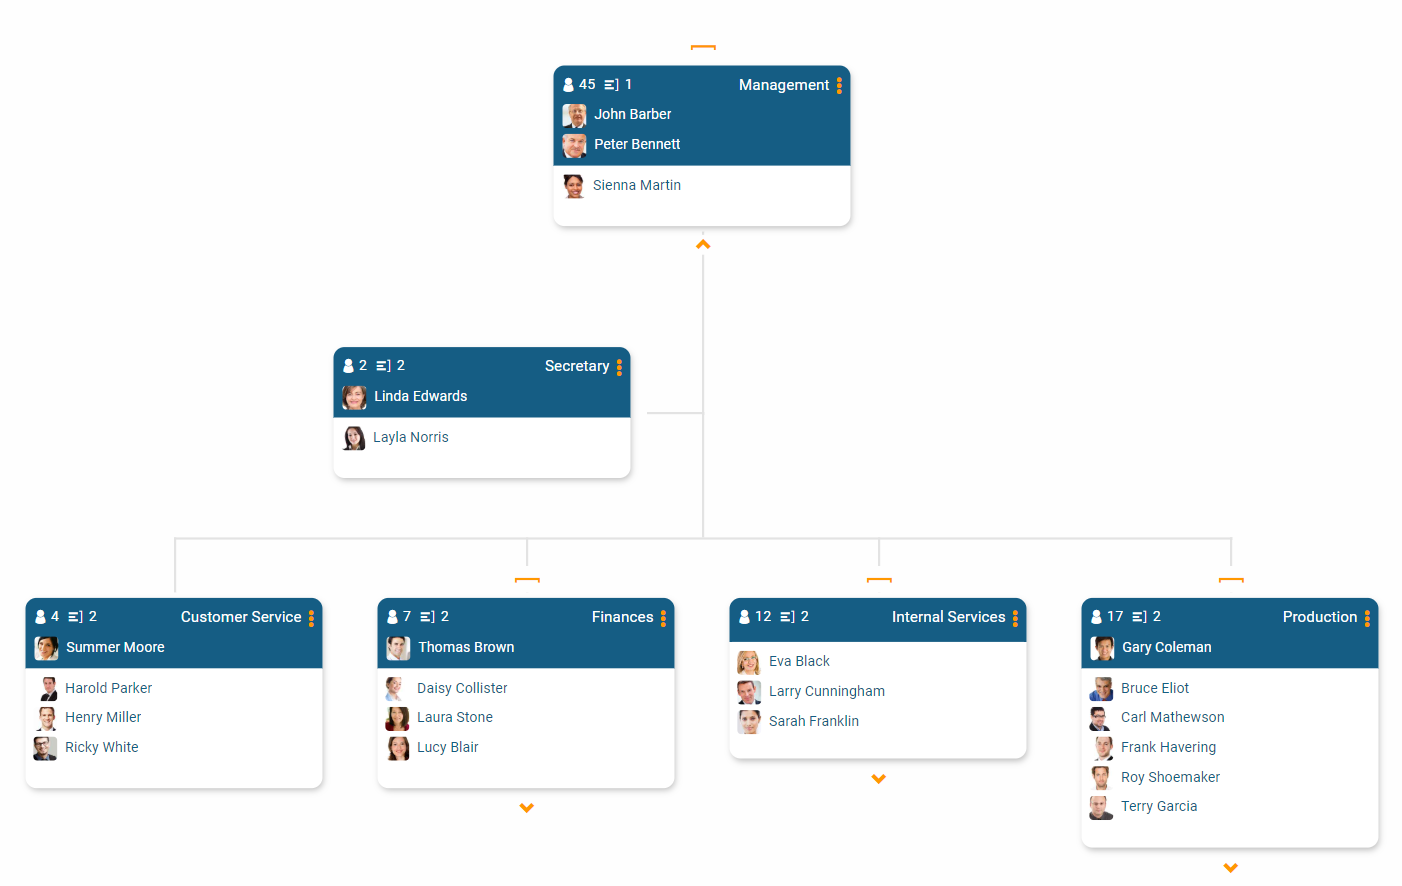 The default KPIs are displayed within the org chart in orginio.